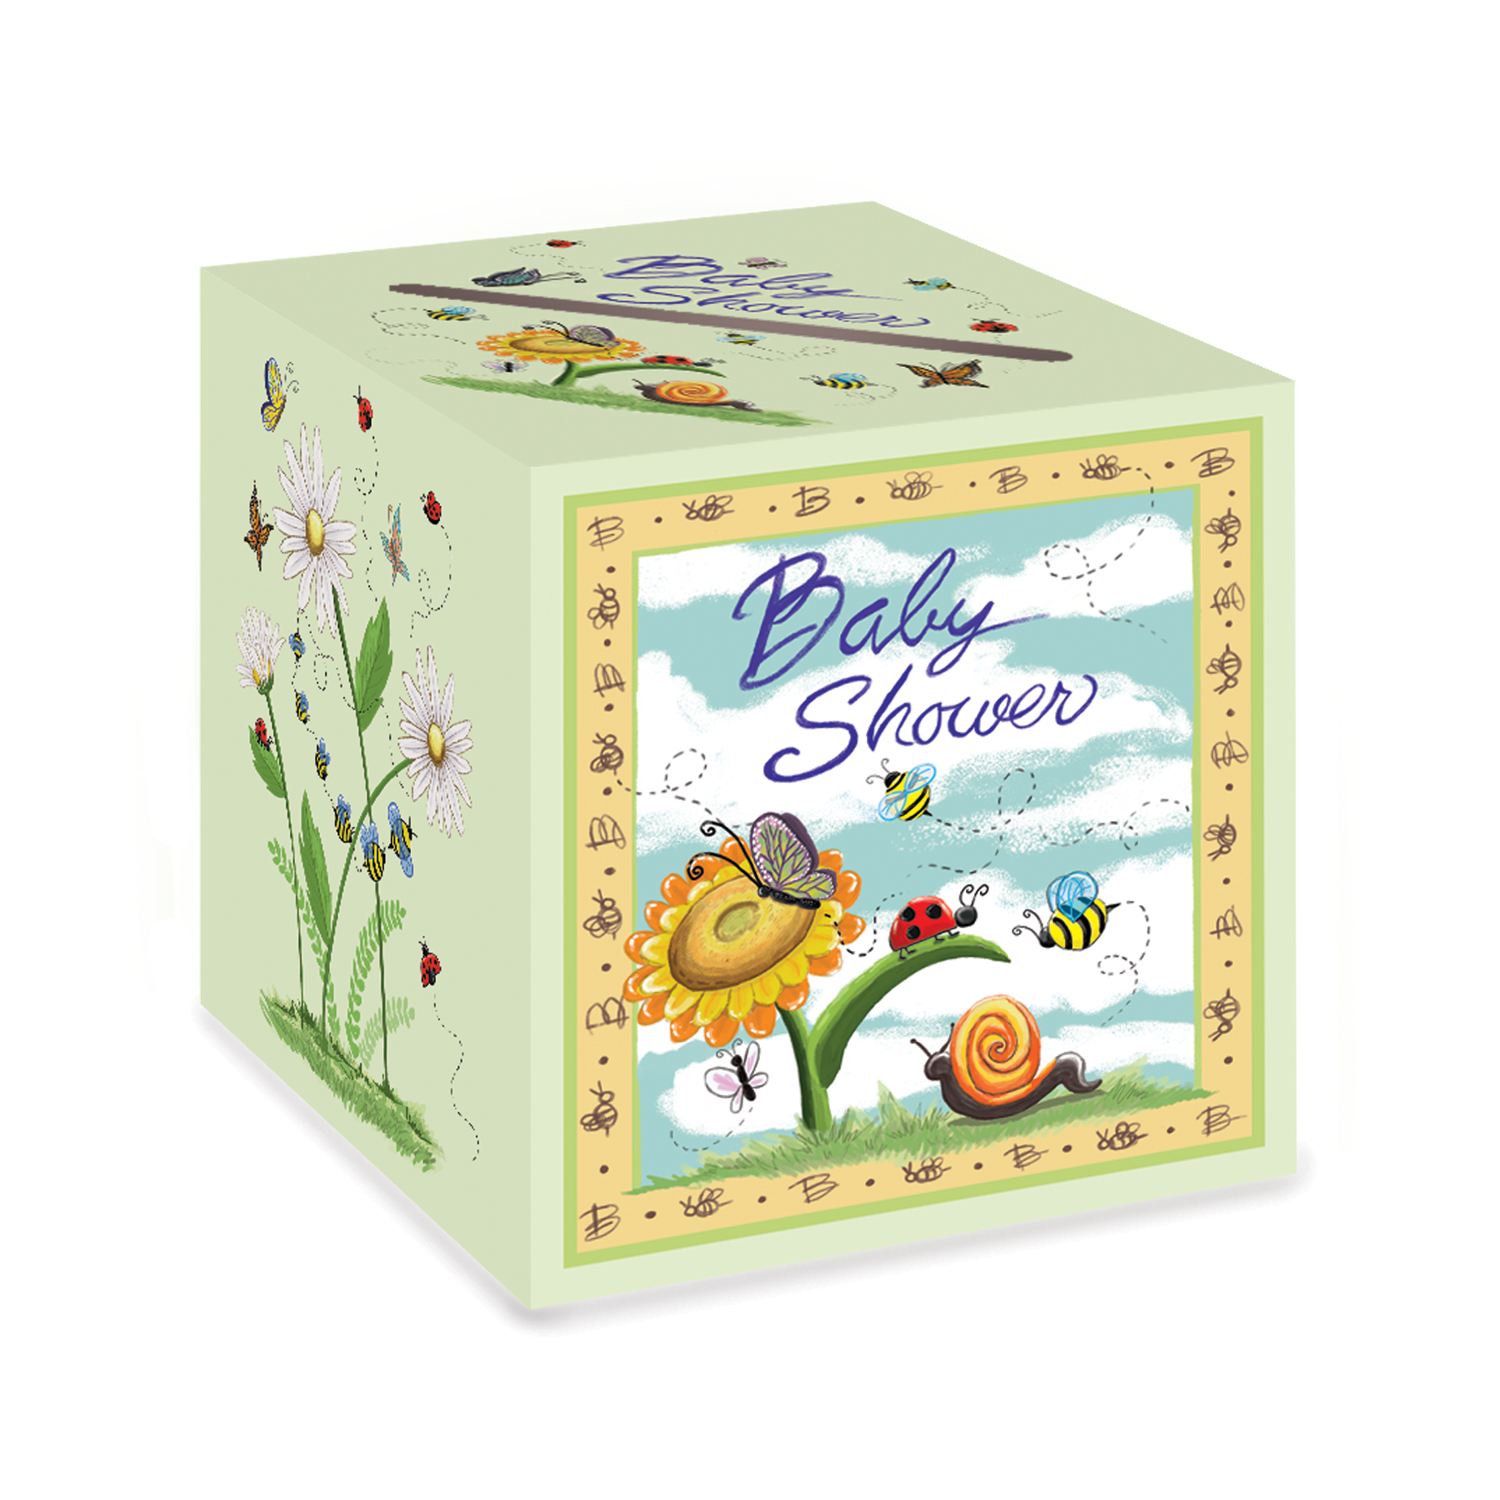 6 Pieces of Baby Shower Card Box